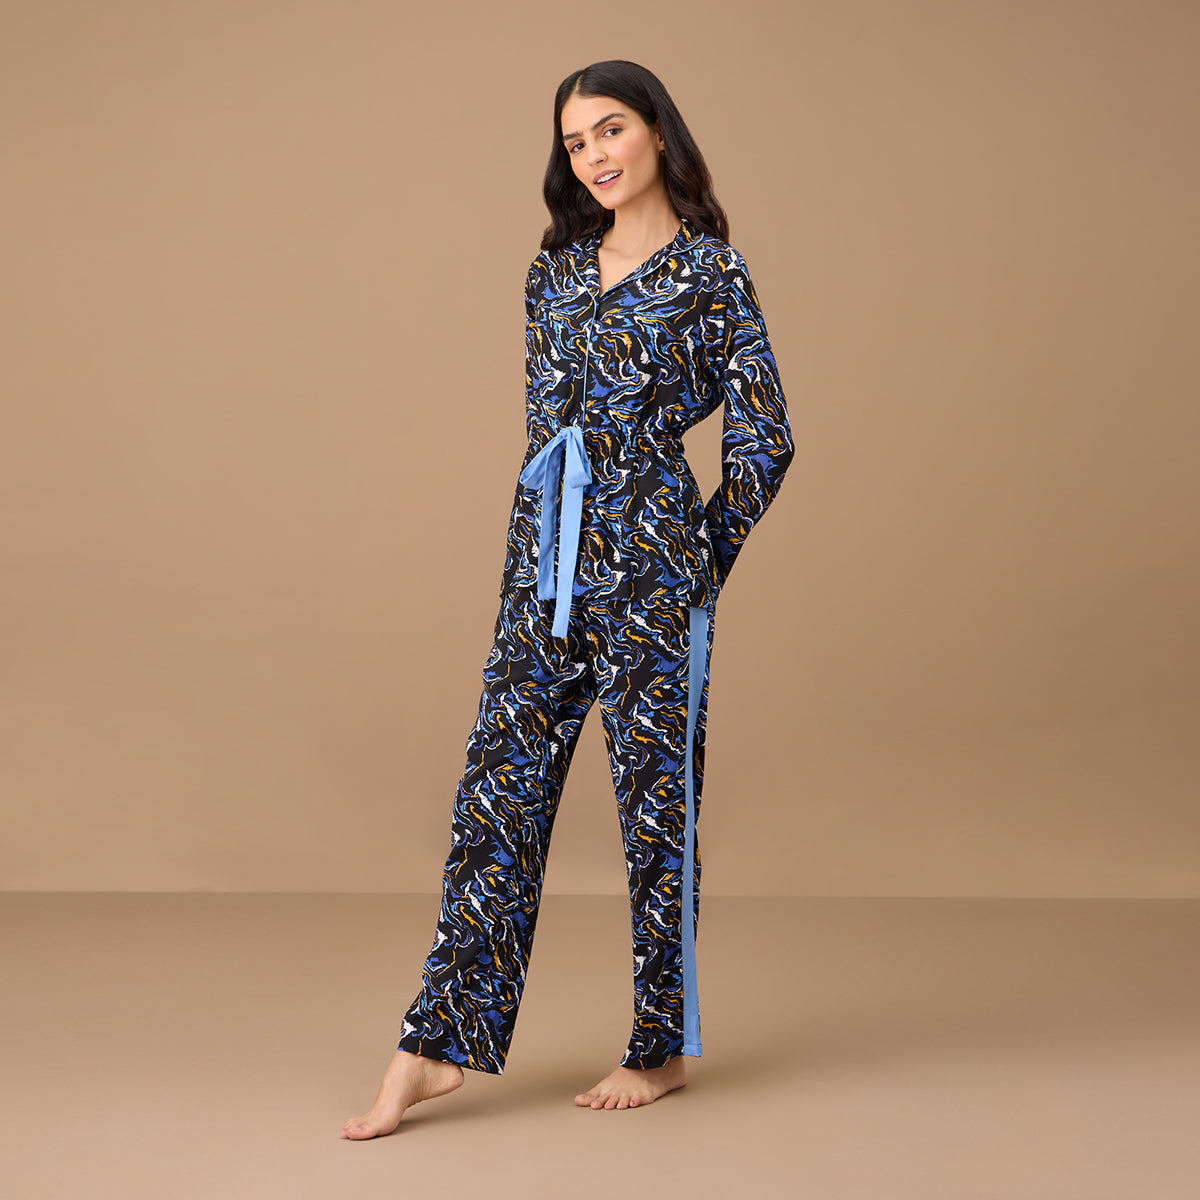 Nykd By Nykaa Style Me Up Rayon Set - NYS904 - Black Print